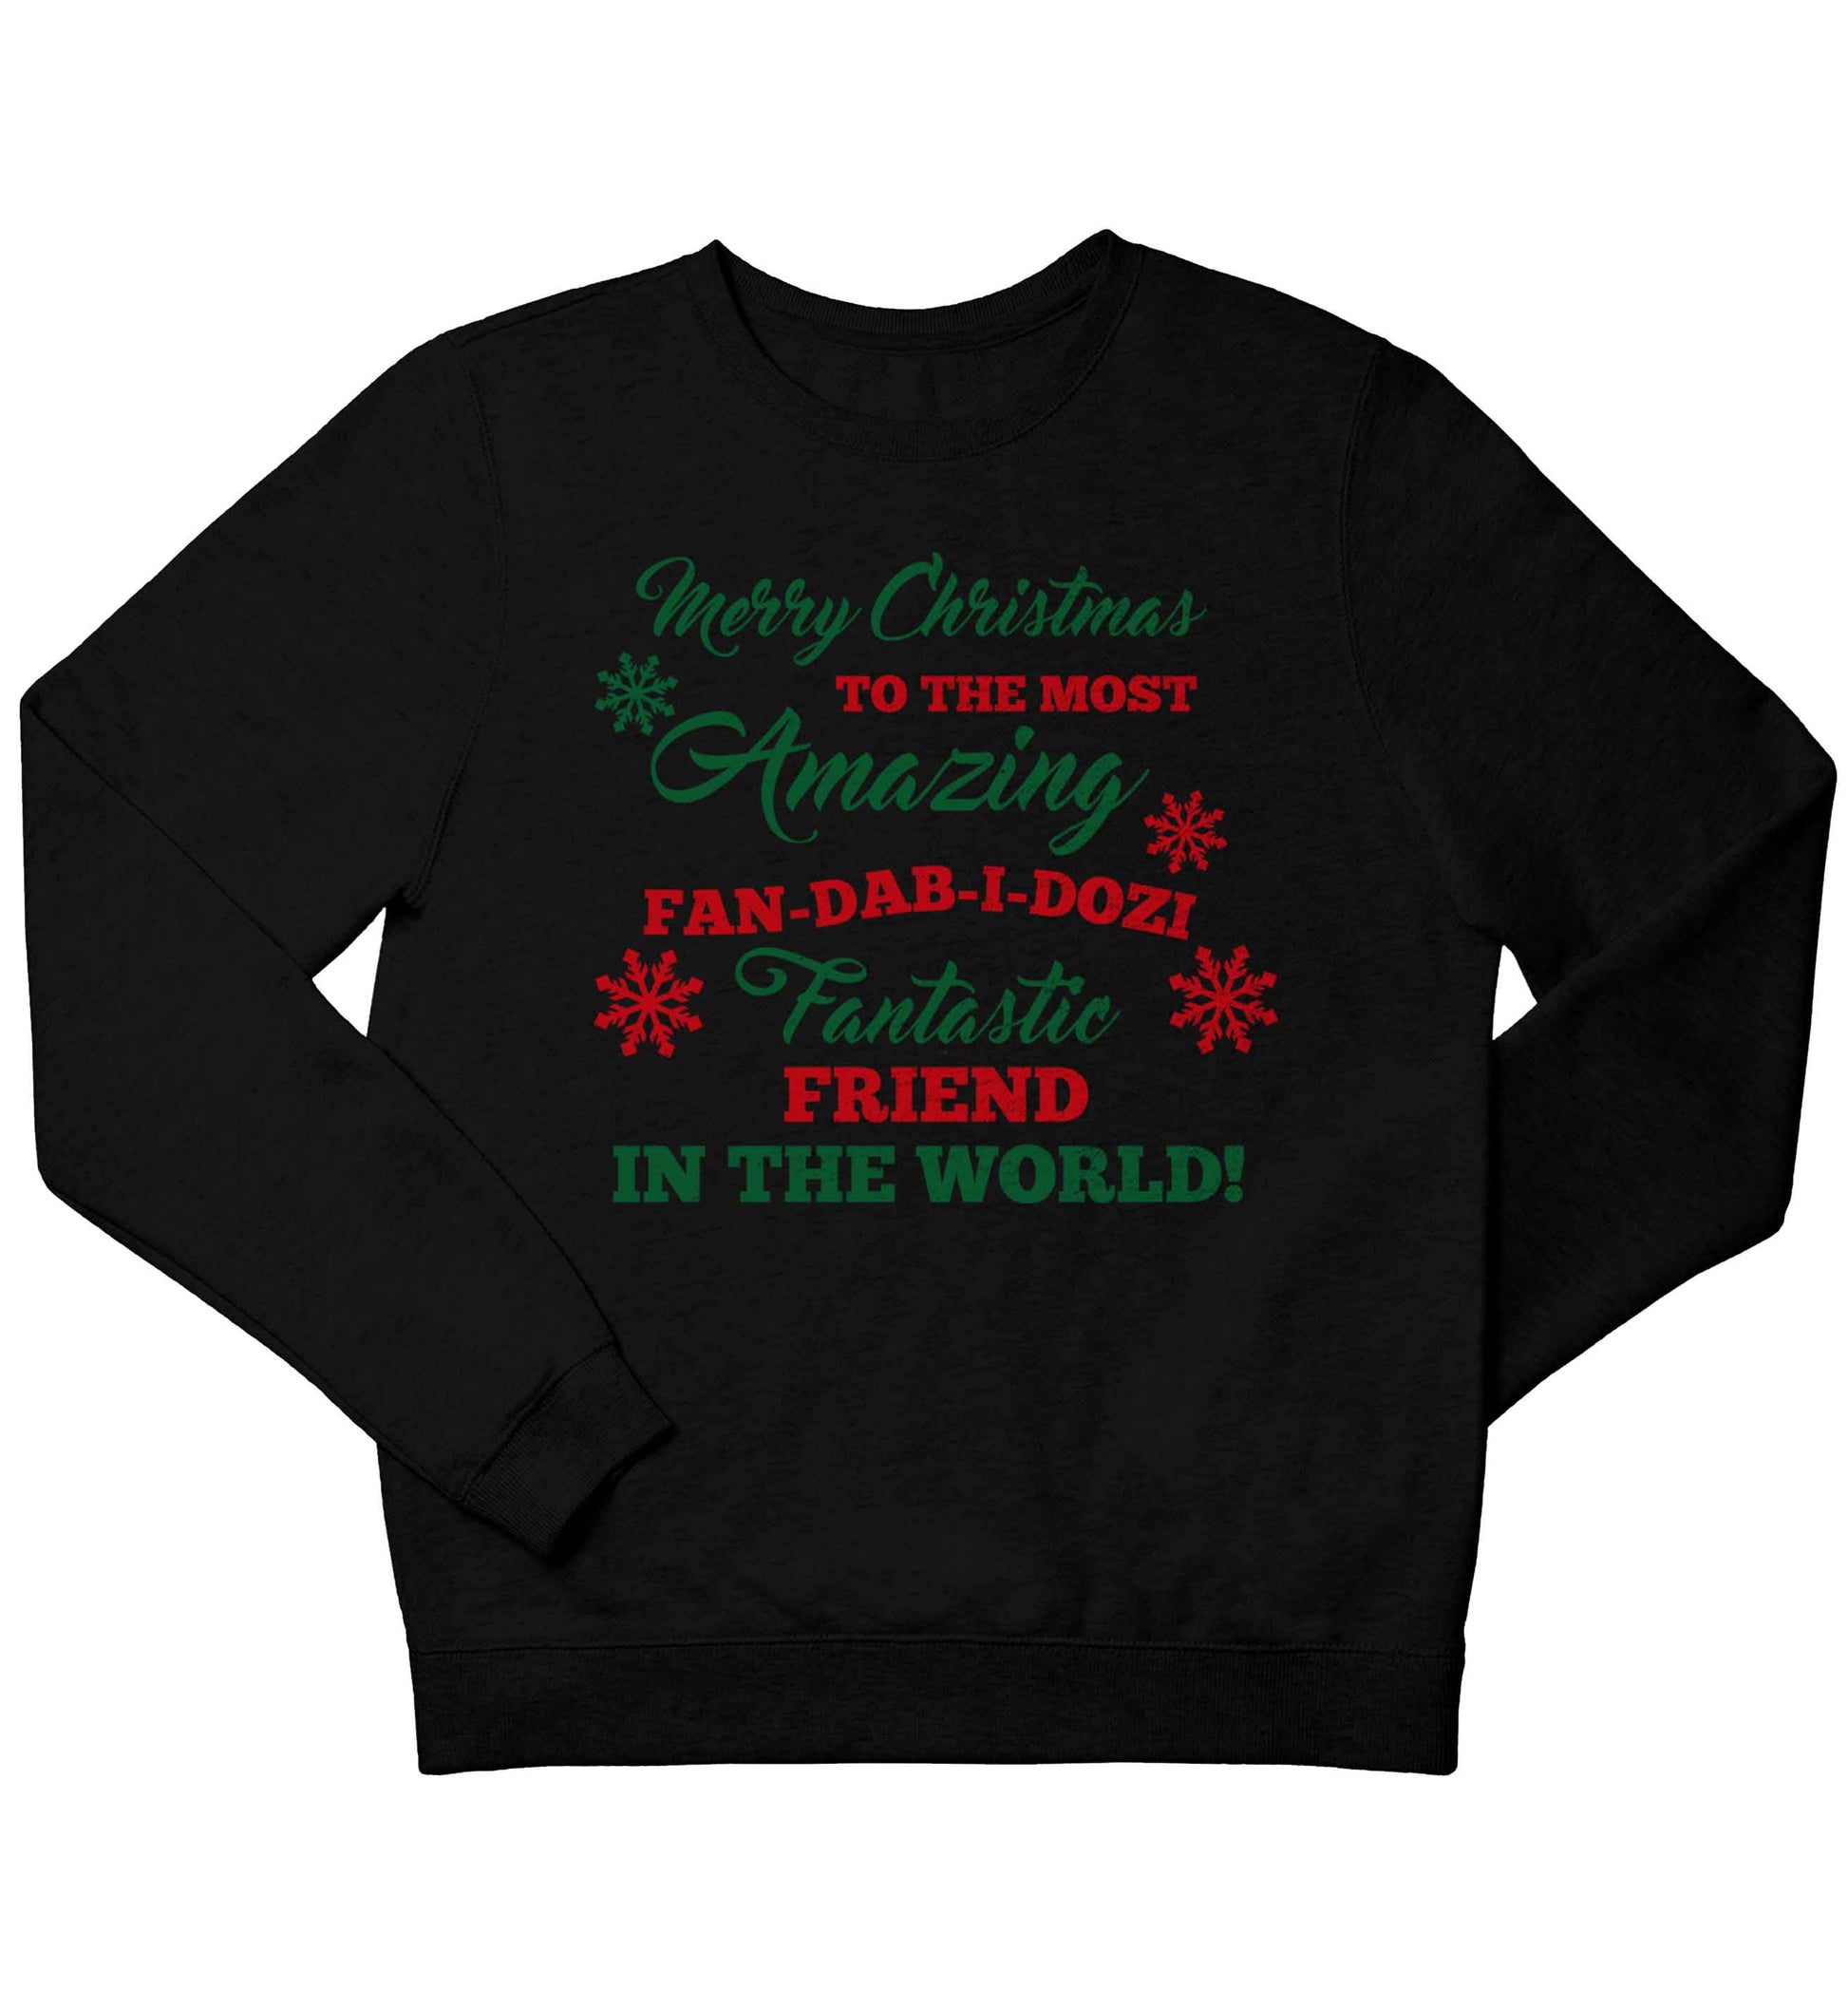 Merry Christmas to the most amazing fan-dab-i-dozi fantasic friend in the world children's black sweater 12-13 Years